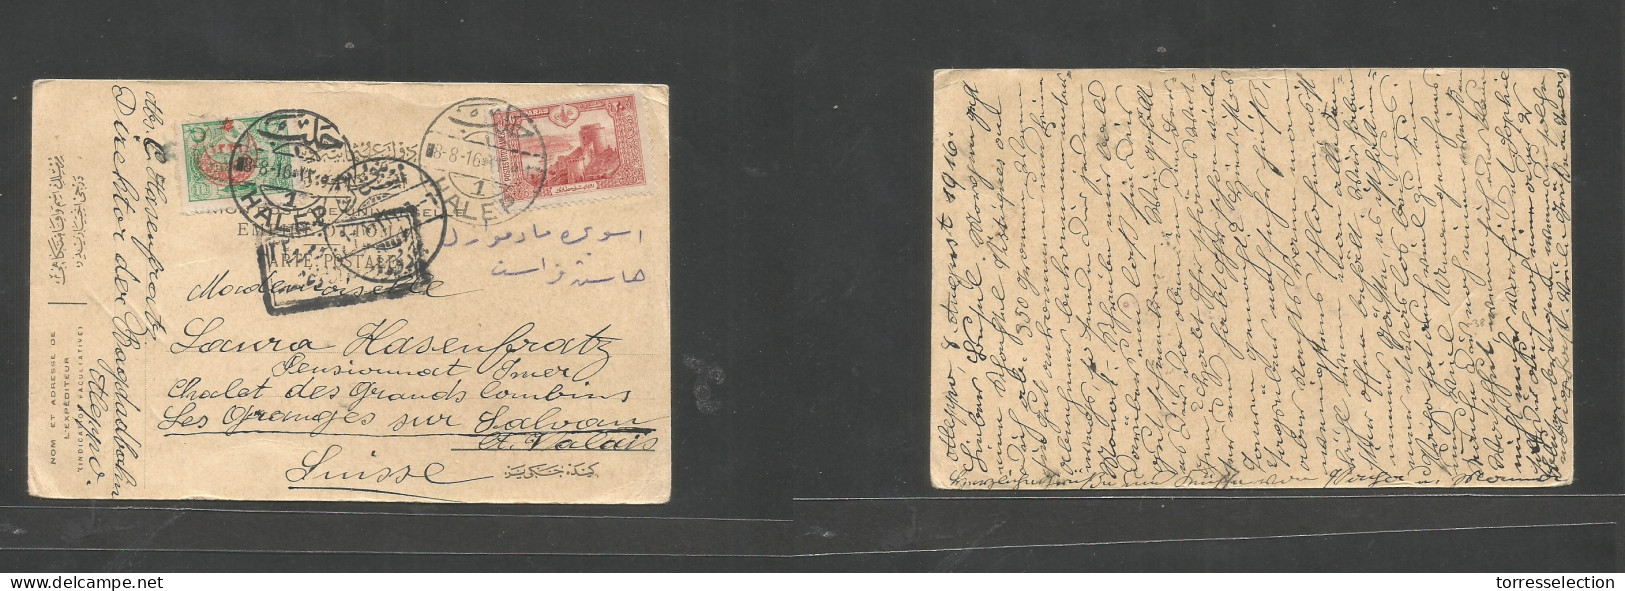 SYRIA. 1916 (8 Aug) Turkish Admin, Halep - Switzerland, Lausanne. Multifkd Private Card At 20p Rate, Tied Bilingual Cds  - Syria